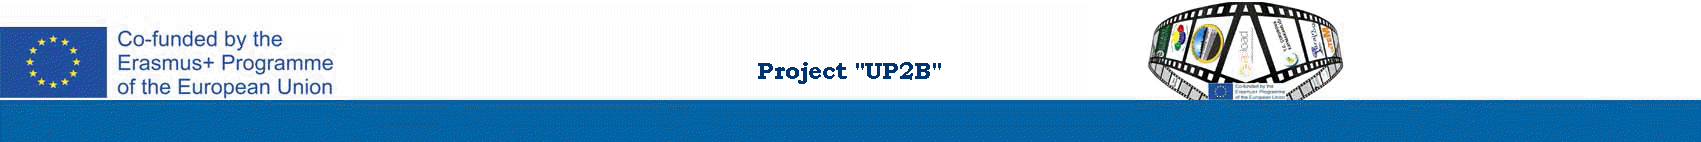 Project "UP2B"